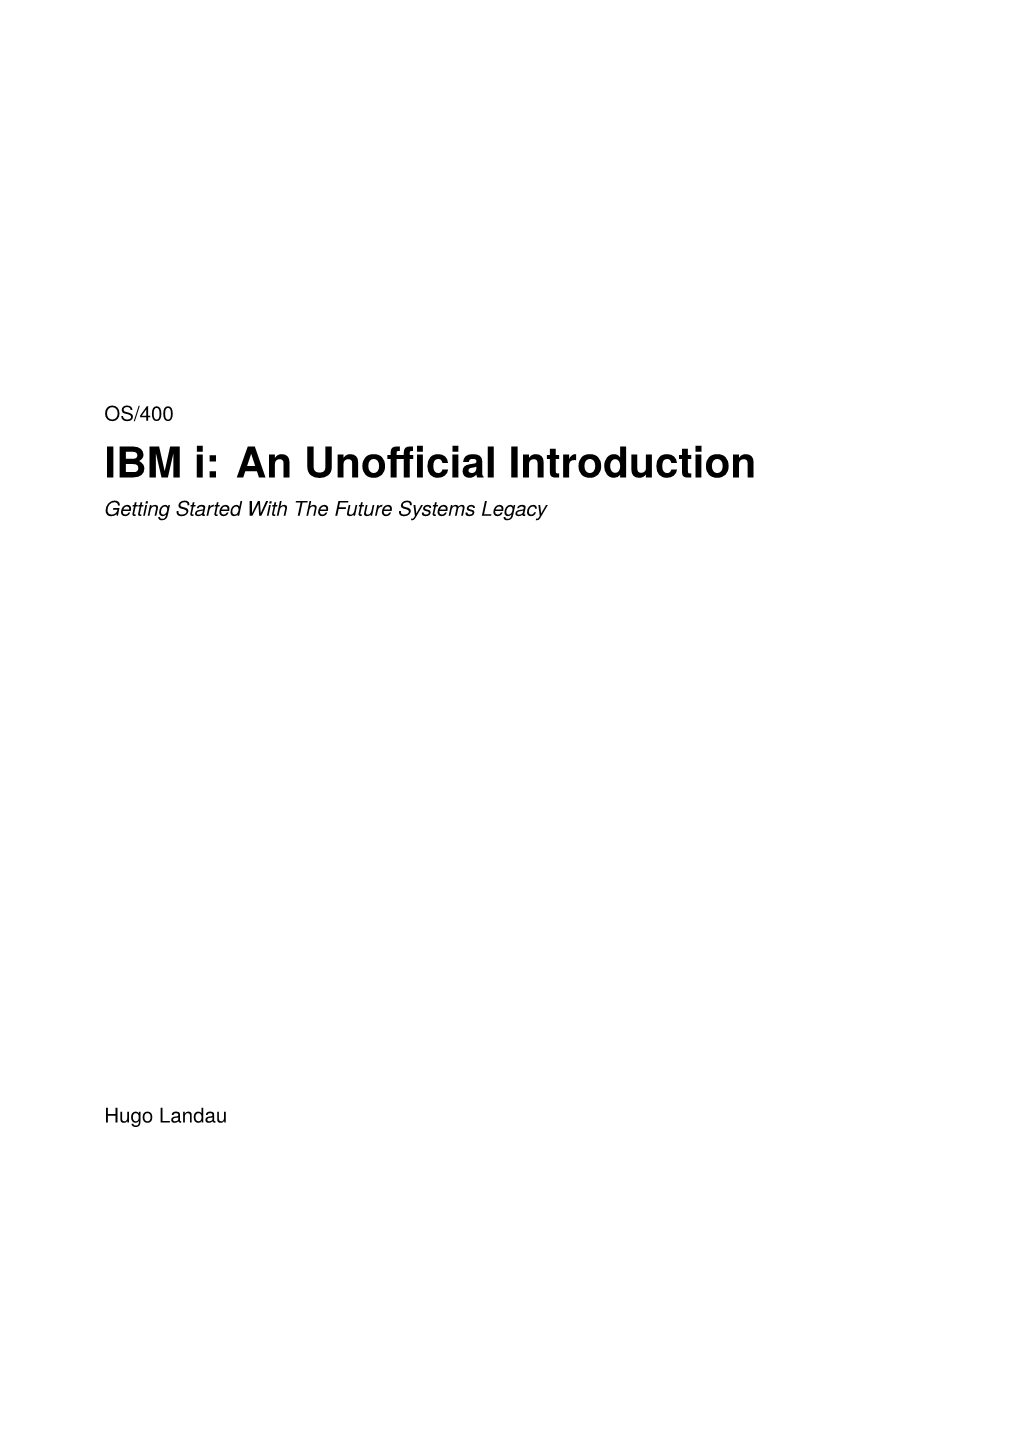 IBM I: an Unofficial Introduction Getting Started with the Future Systems Legacy